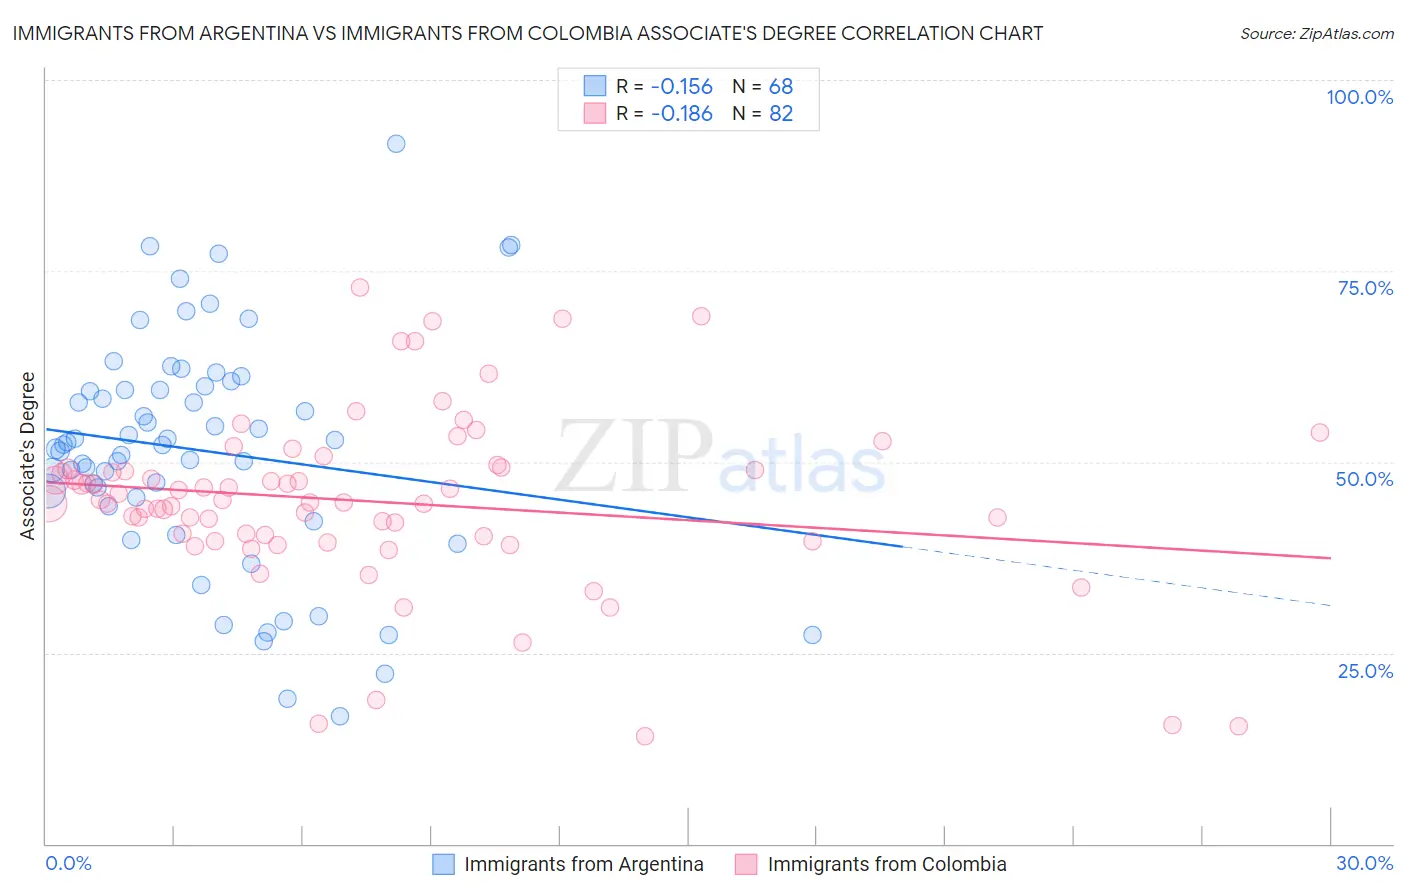 Immigrants from Argentina vs Immigrants from Colombia Associate's Degree